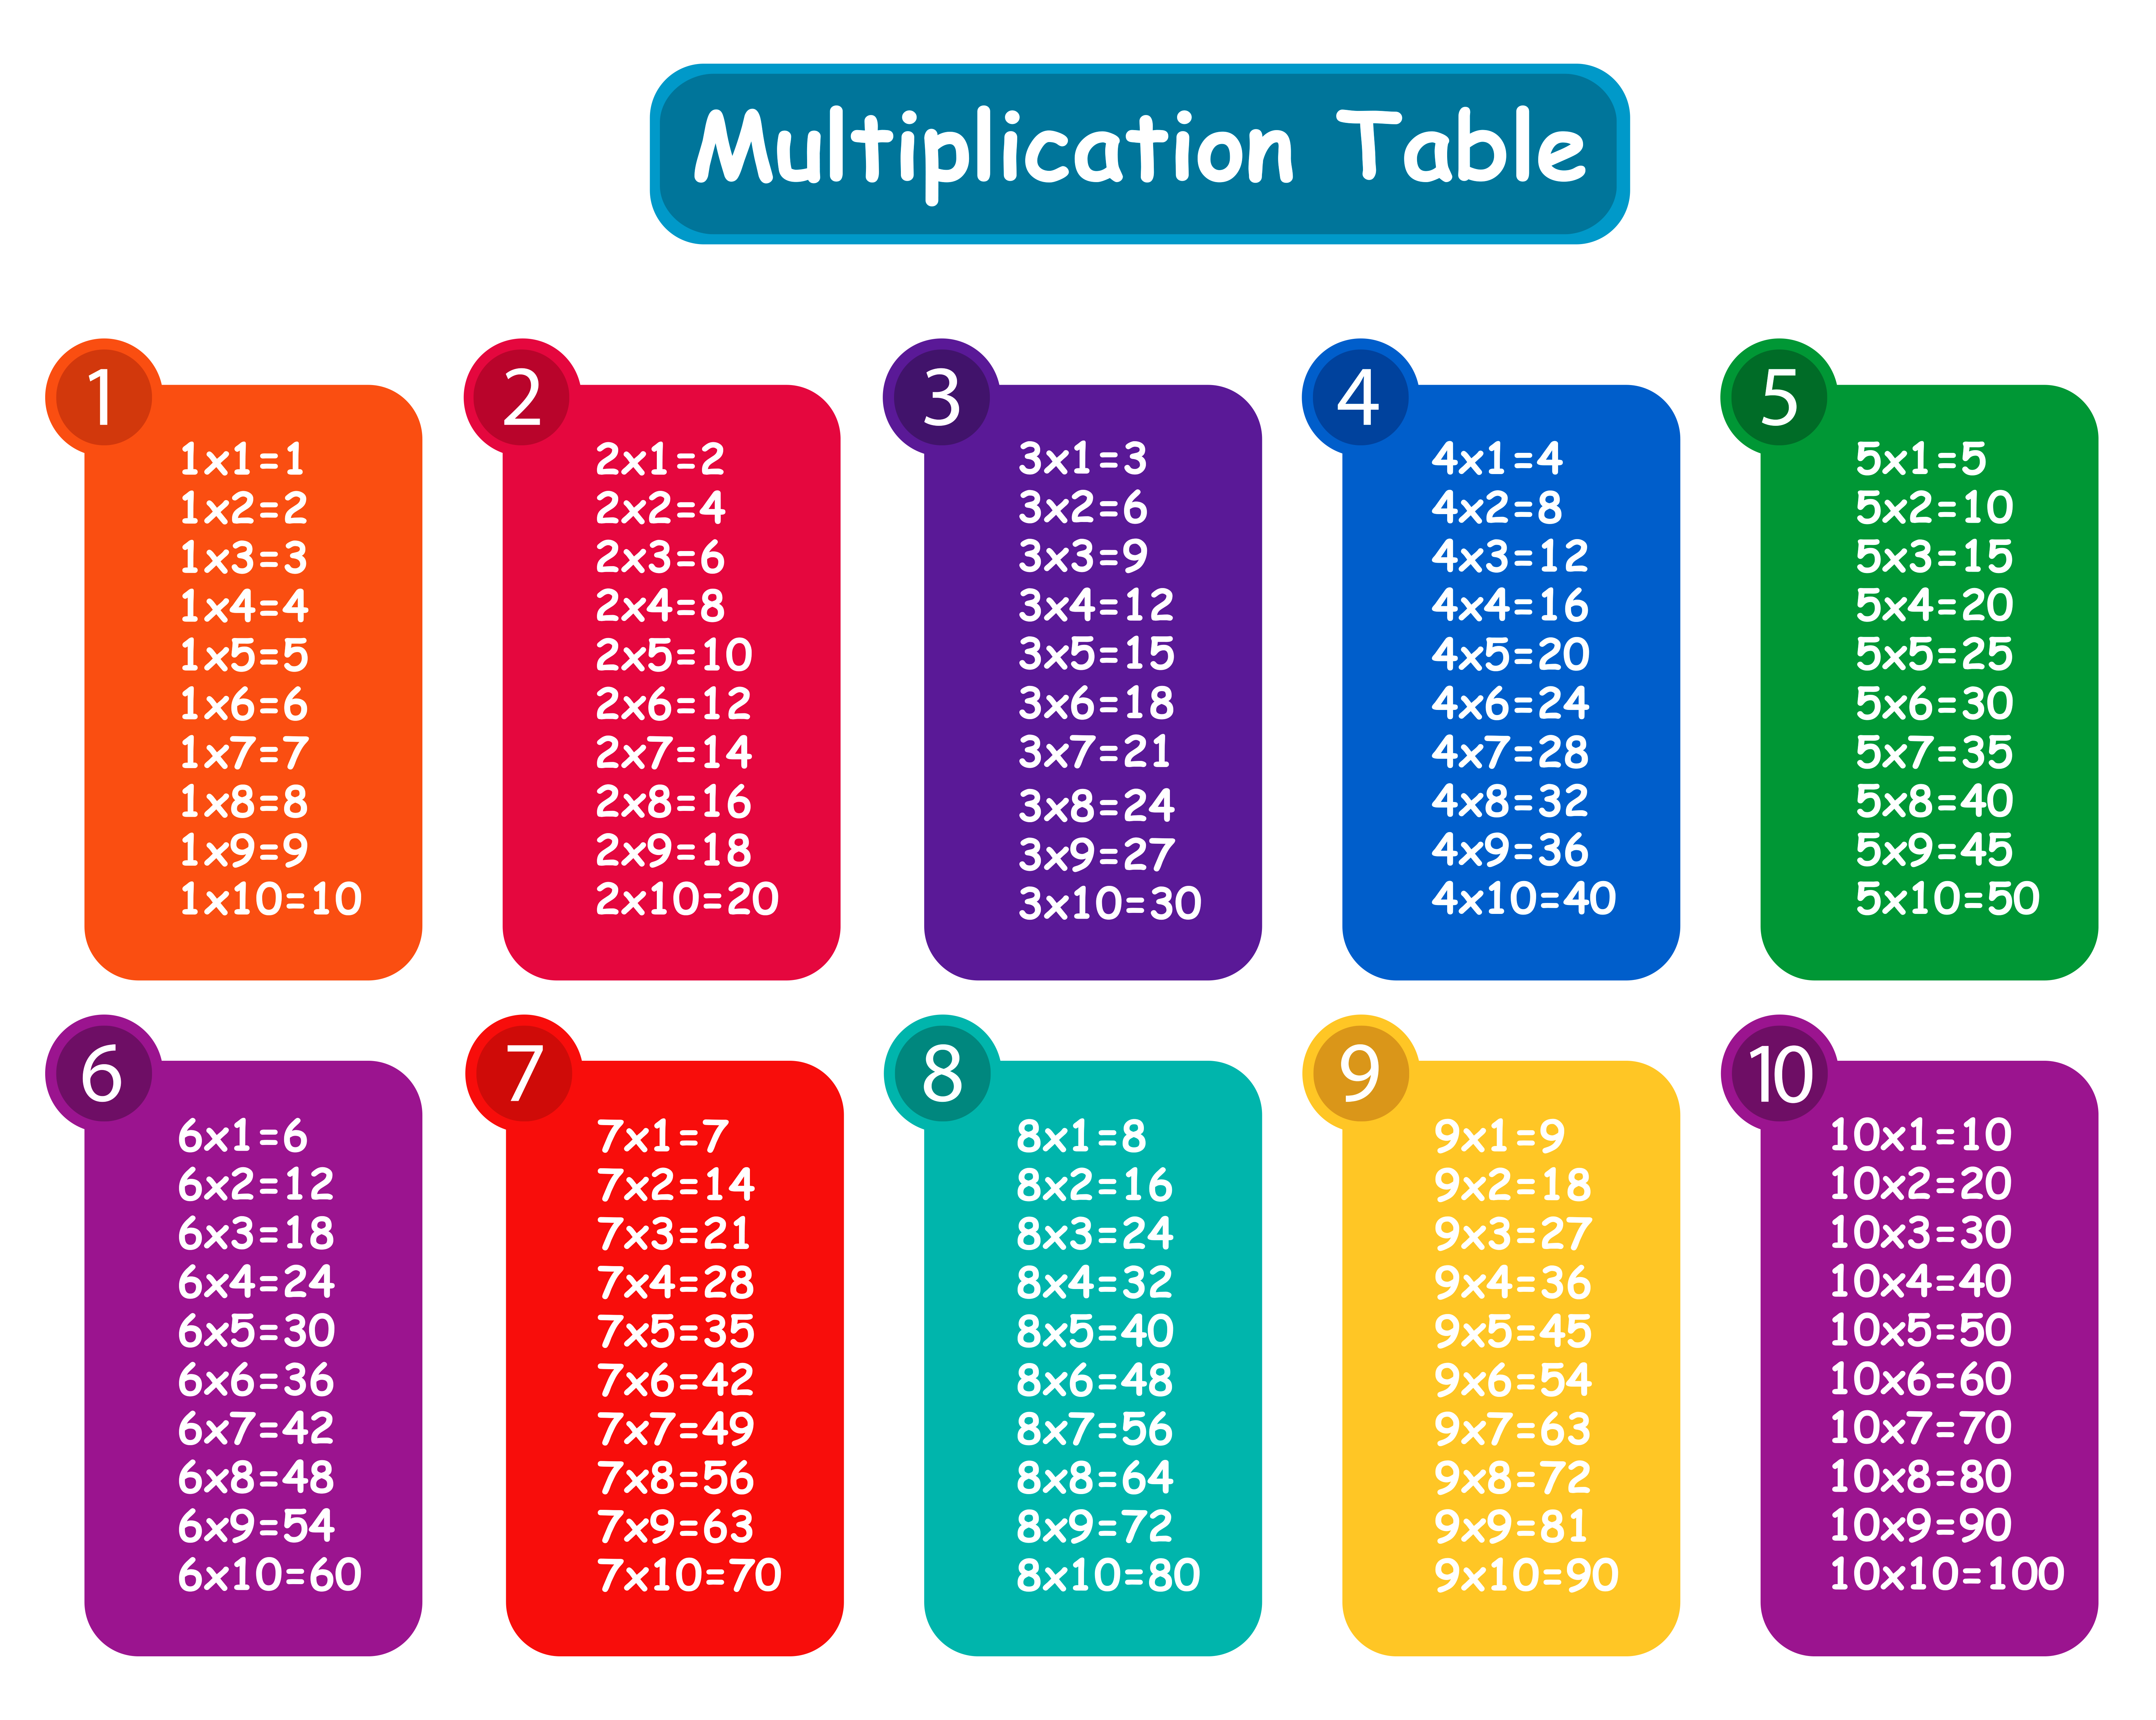 Colorful Multiplication Table PNG Clipart Quality Image And. Multiplication Table, Multiplication, Multiplication Table Printable